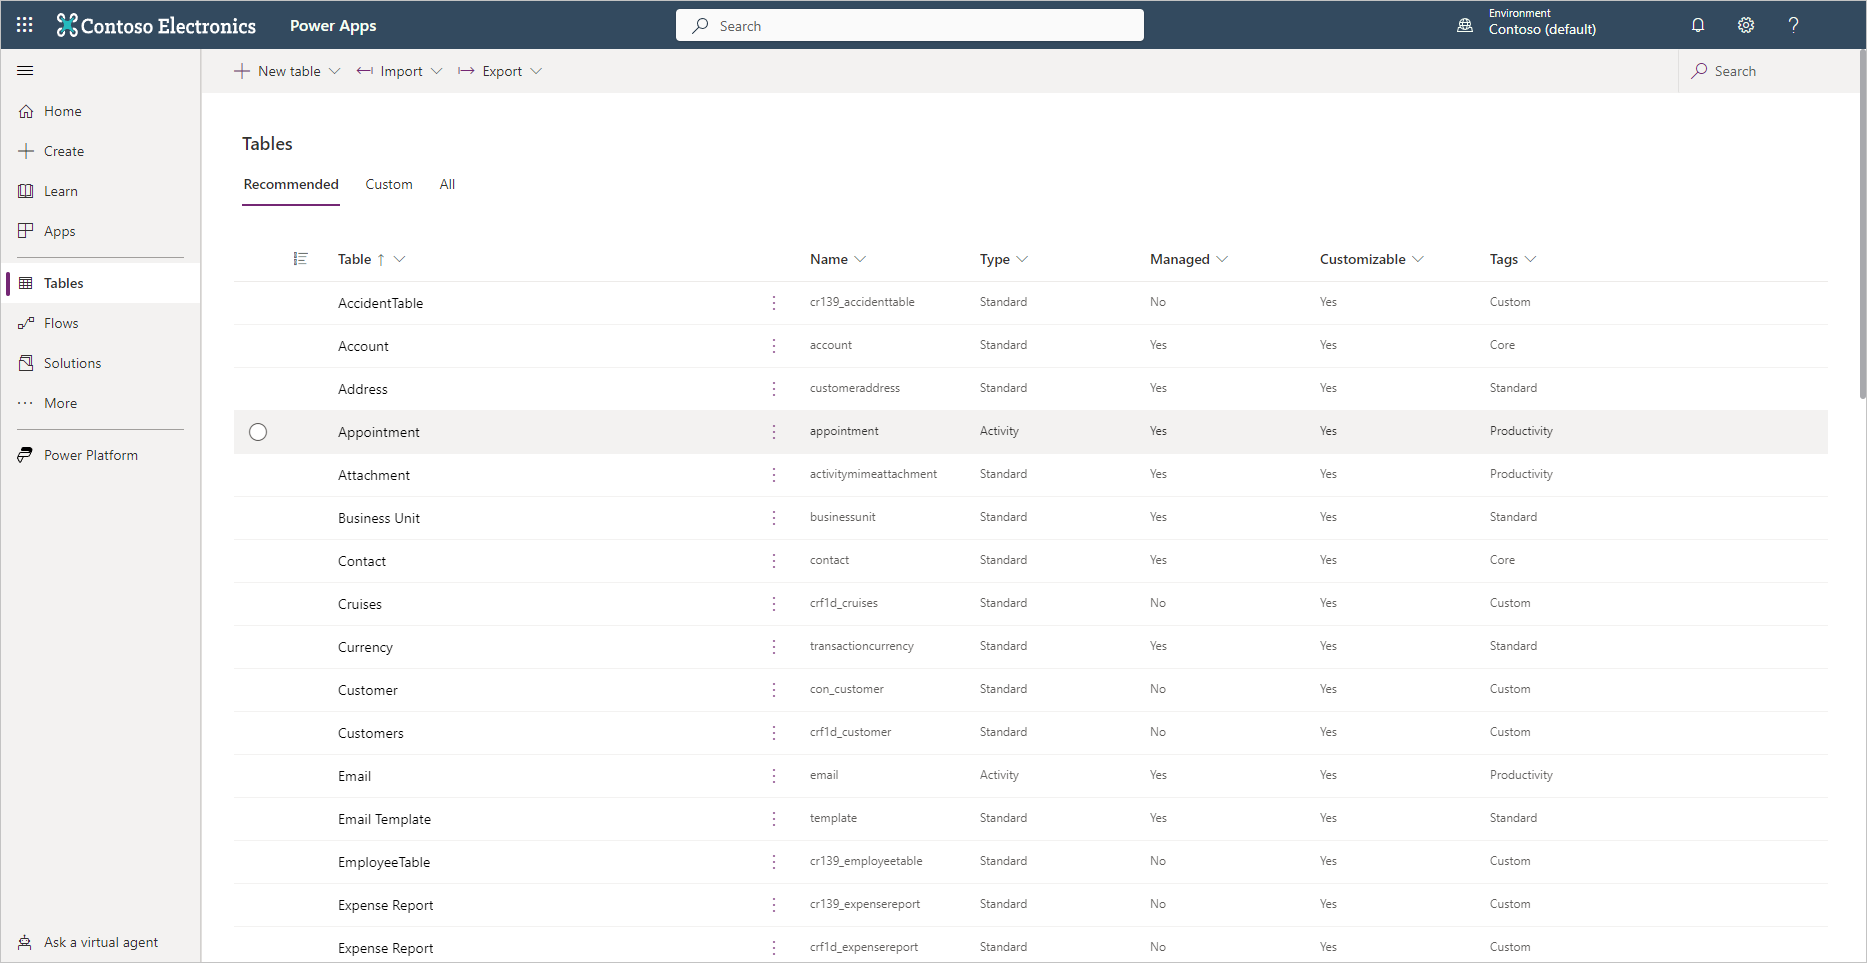 Screenshot of Power Apps showing a list of the standard tables in Dataverse.